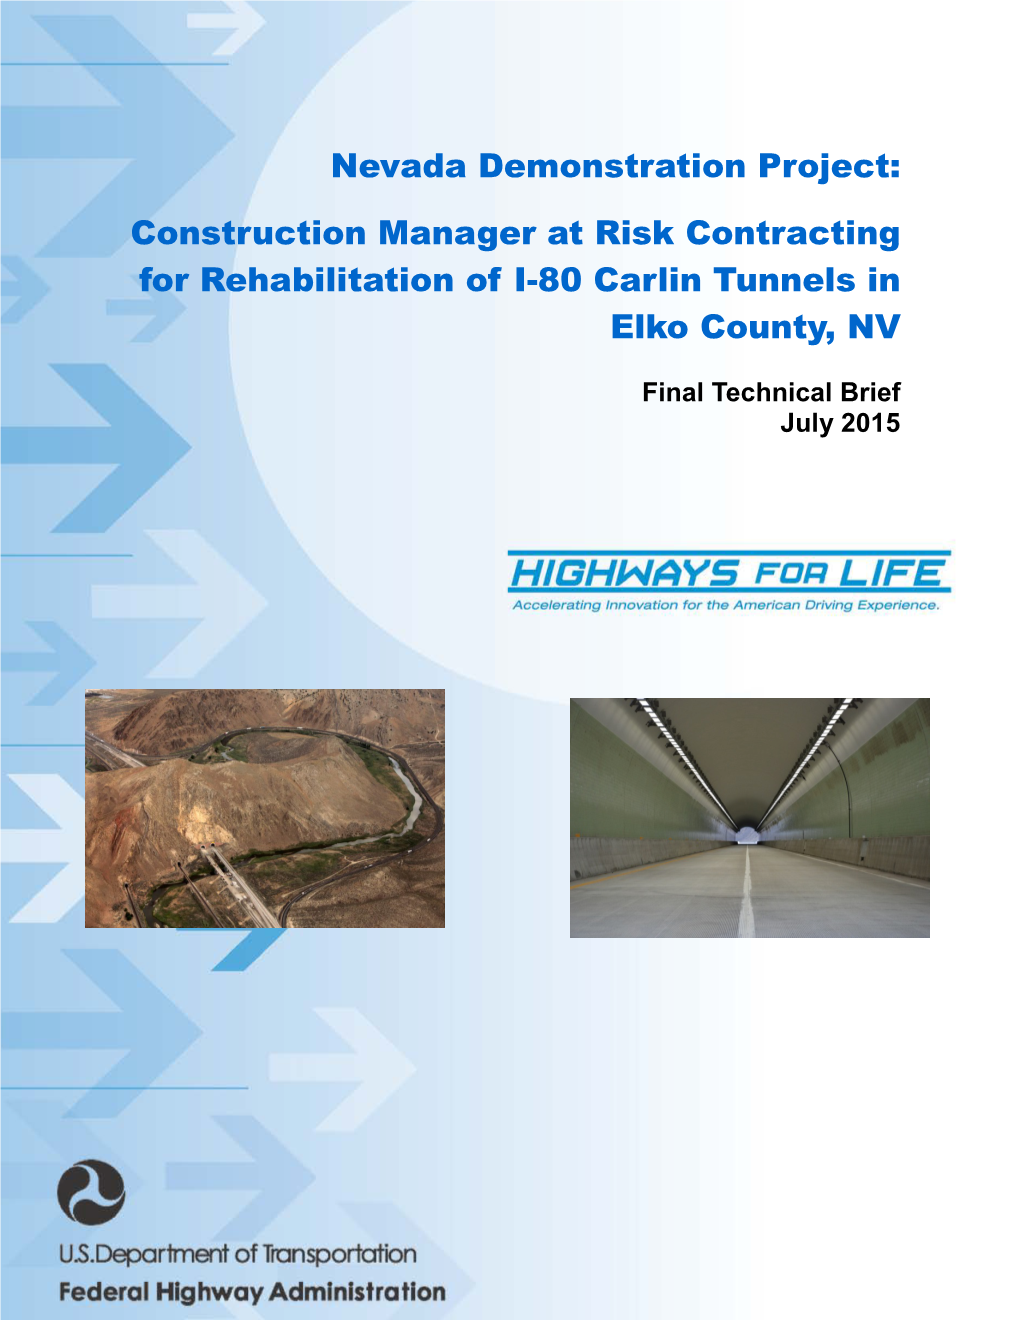 Construction Manager at Risk Contracting for Rehabilitation of I-80 Carlin Tunnels in Elko County, NV